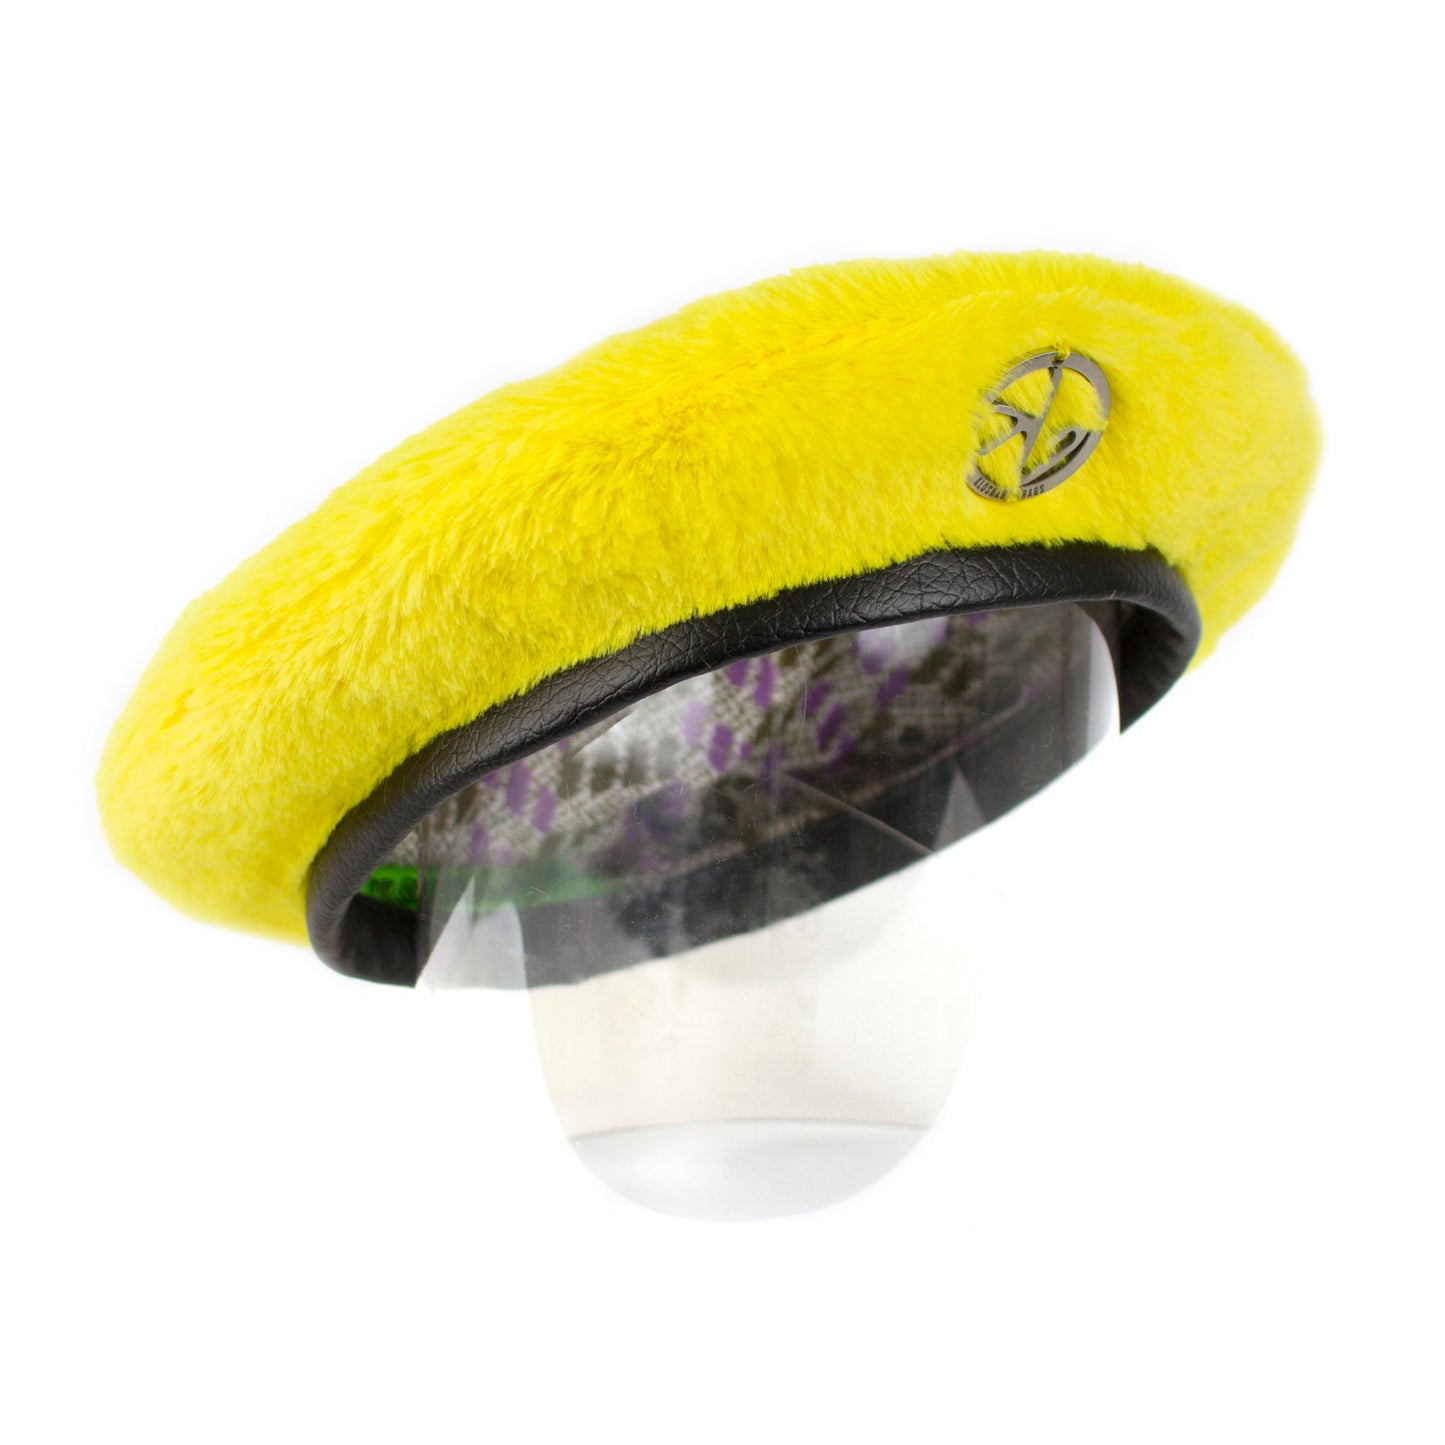 "YELLOW" French beret hat